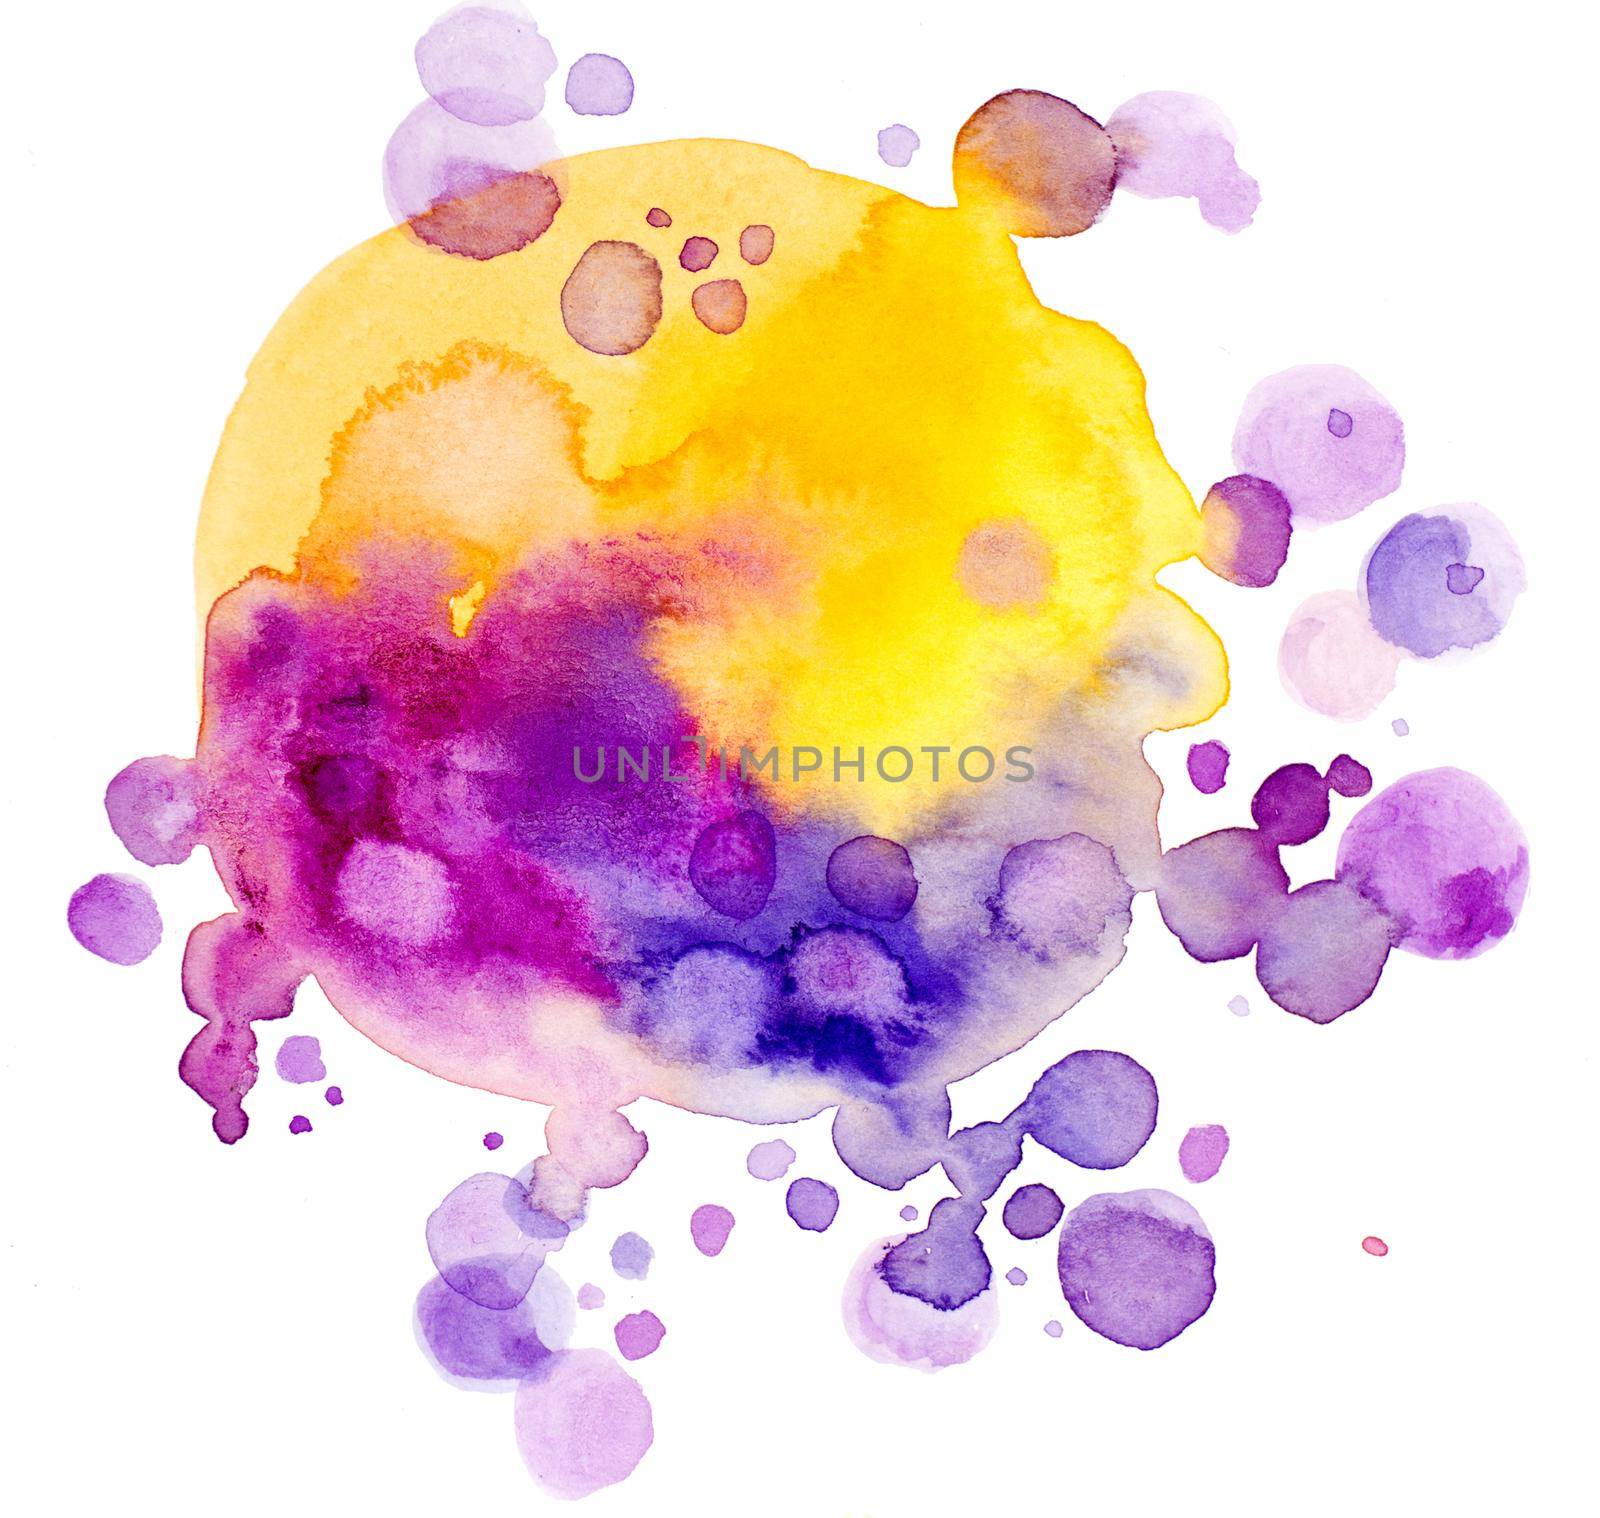 Abstract watercolor gradient purple and yellow drops background